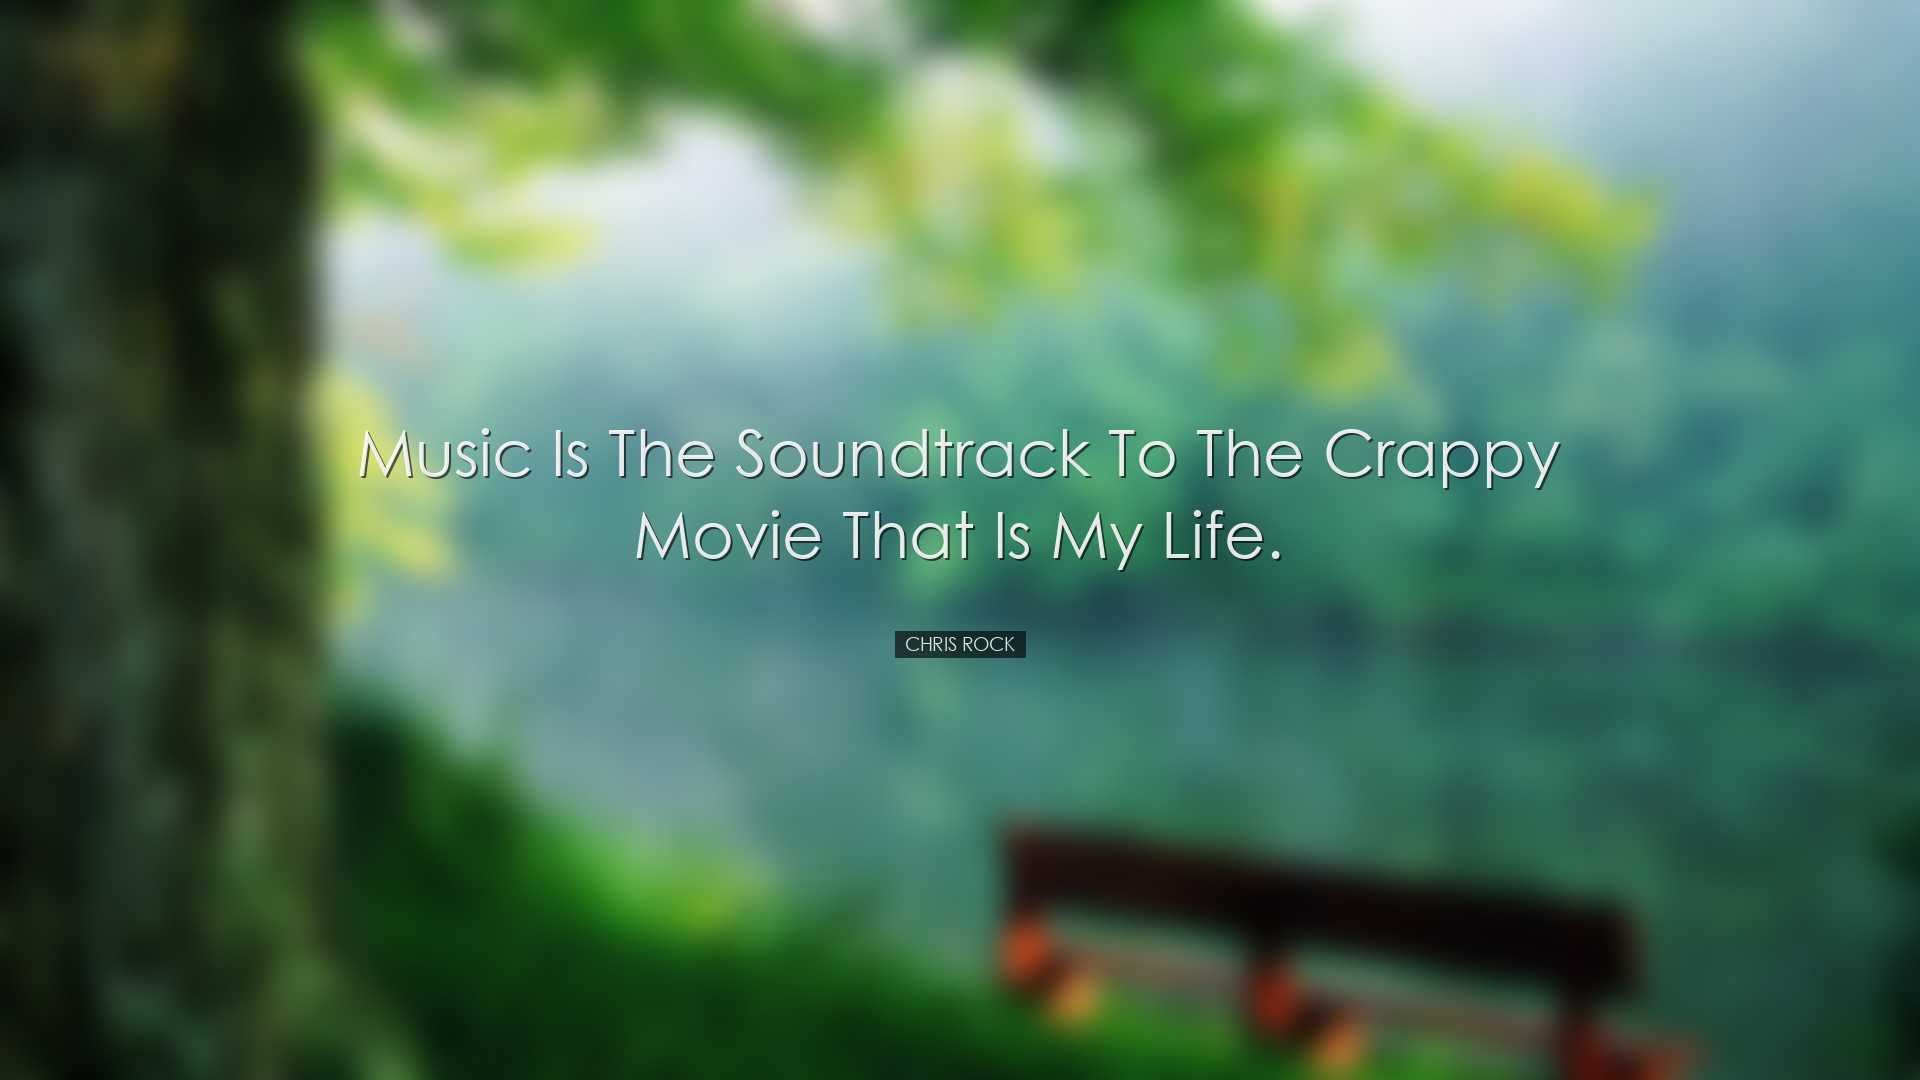 Music is the soundtrack to the crappy movie that is my life. - Chr